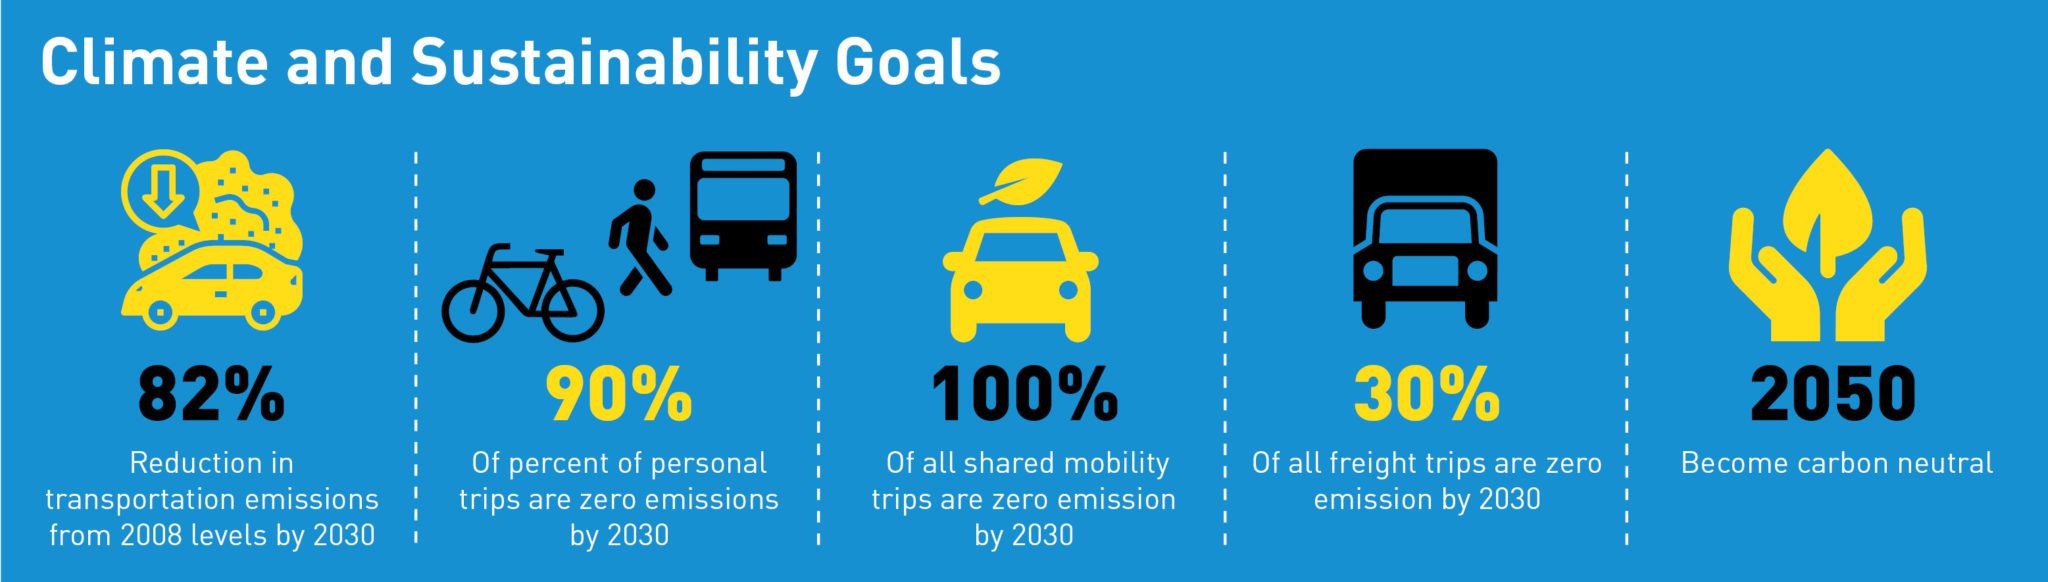 Infographic highlighting Seattle climate and sustainability goals, including reaching an 82% reduction in transportation emissions from 2008 levels by 2030; 90% of personal trips being zero emissions by 2030; 100% of all shared mobility trips being zero emission by 2030; 30% of all freight trips being zero emission by 2030; and becoming carbon neutral by 2050.